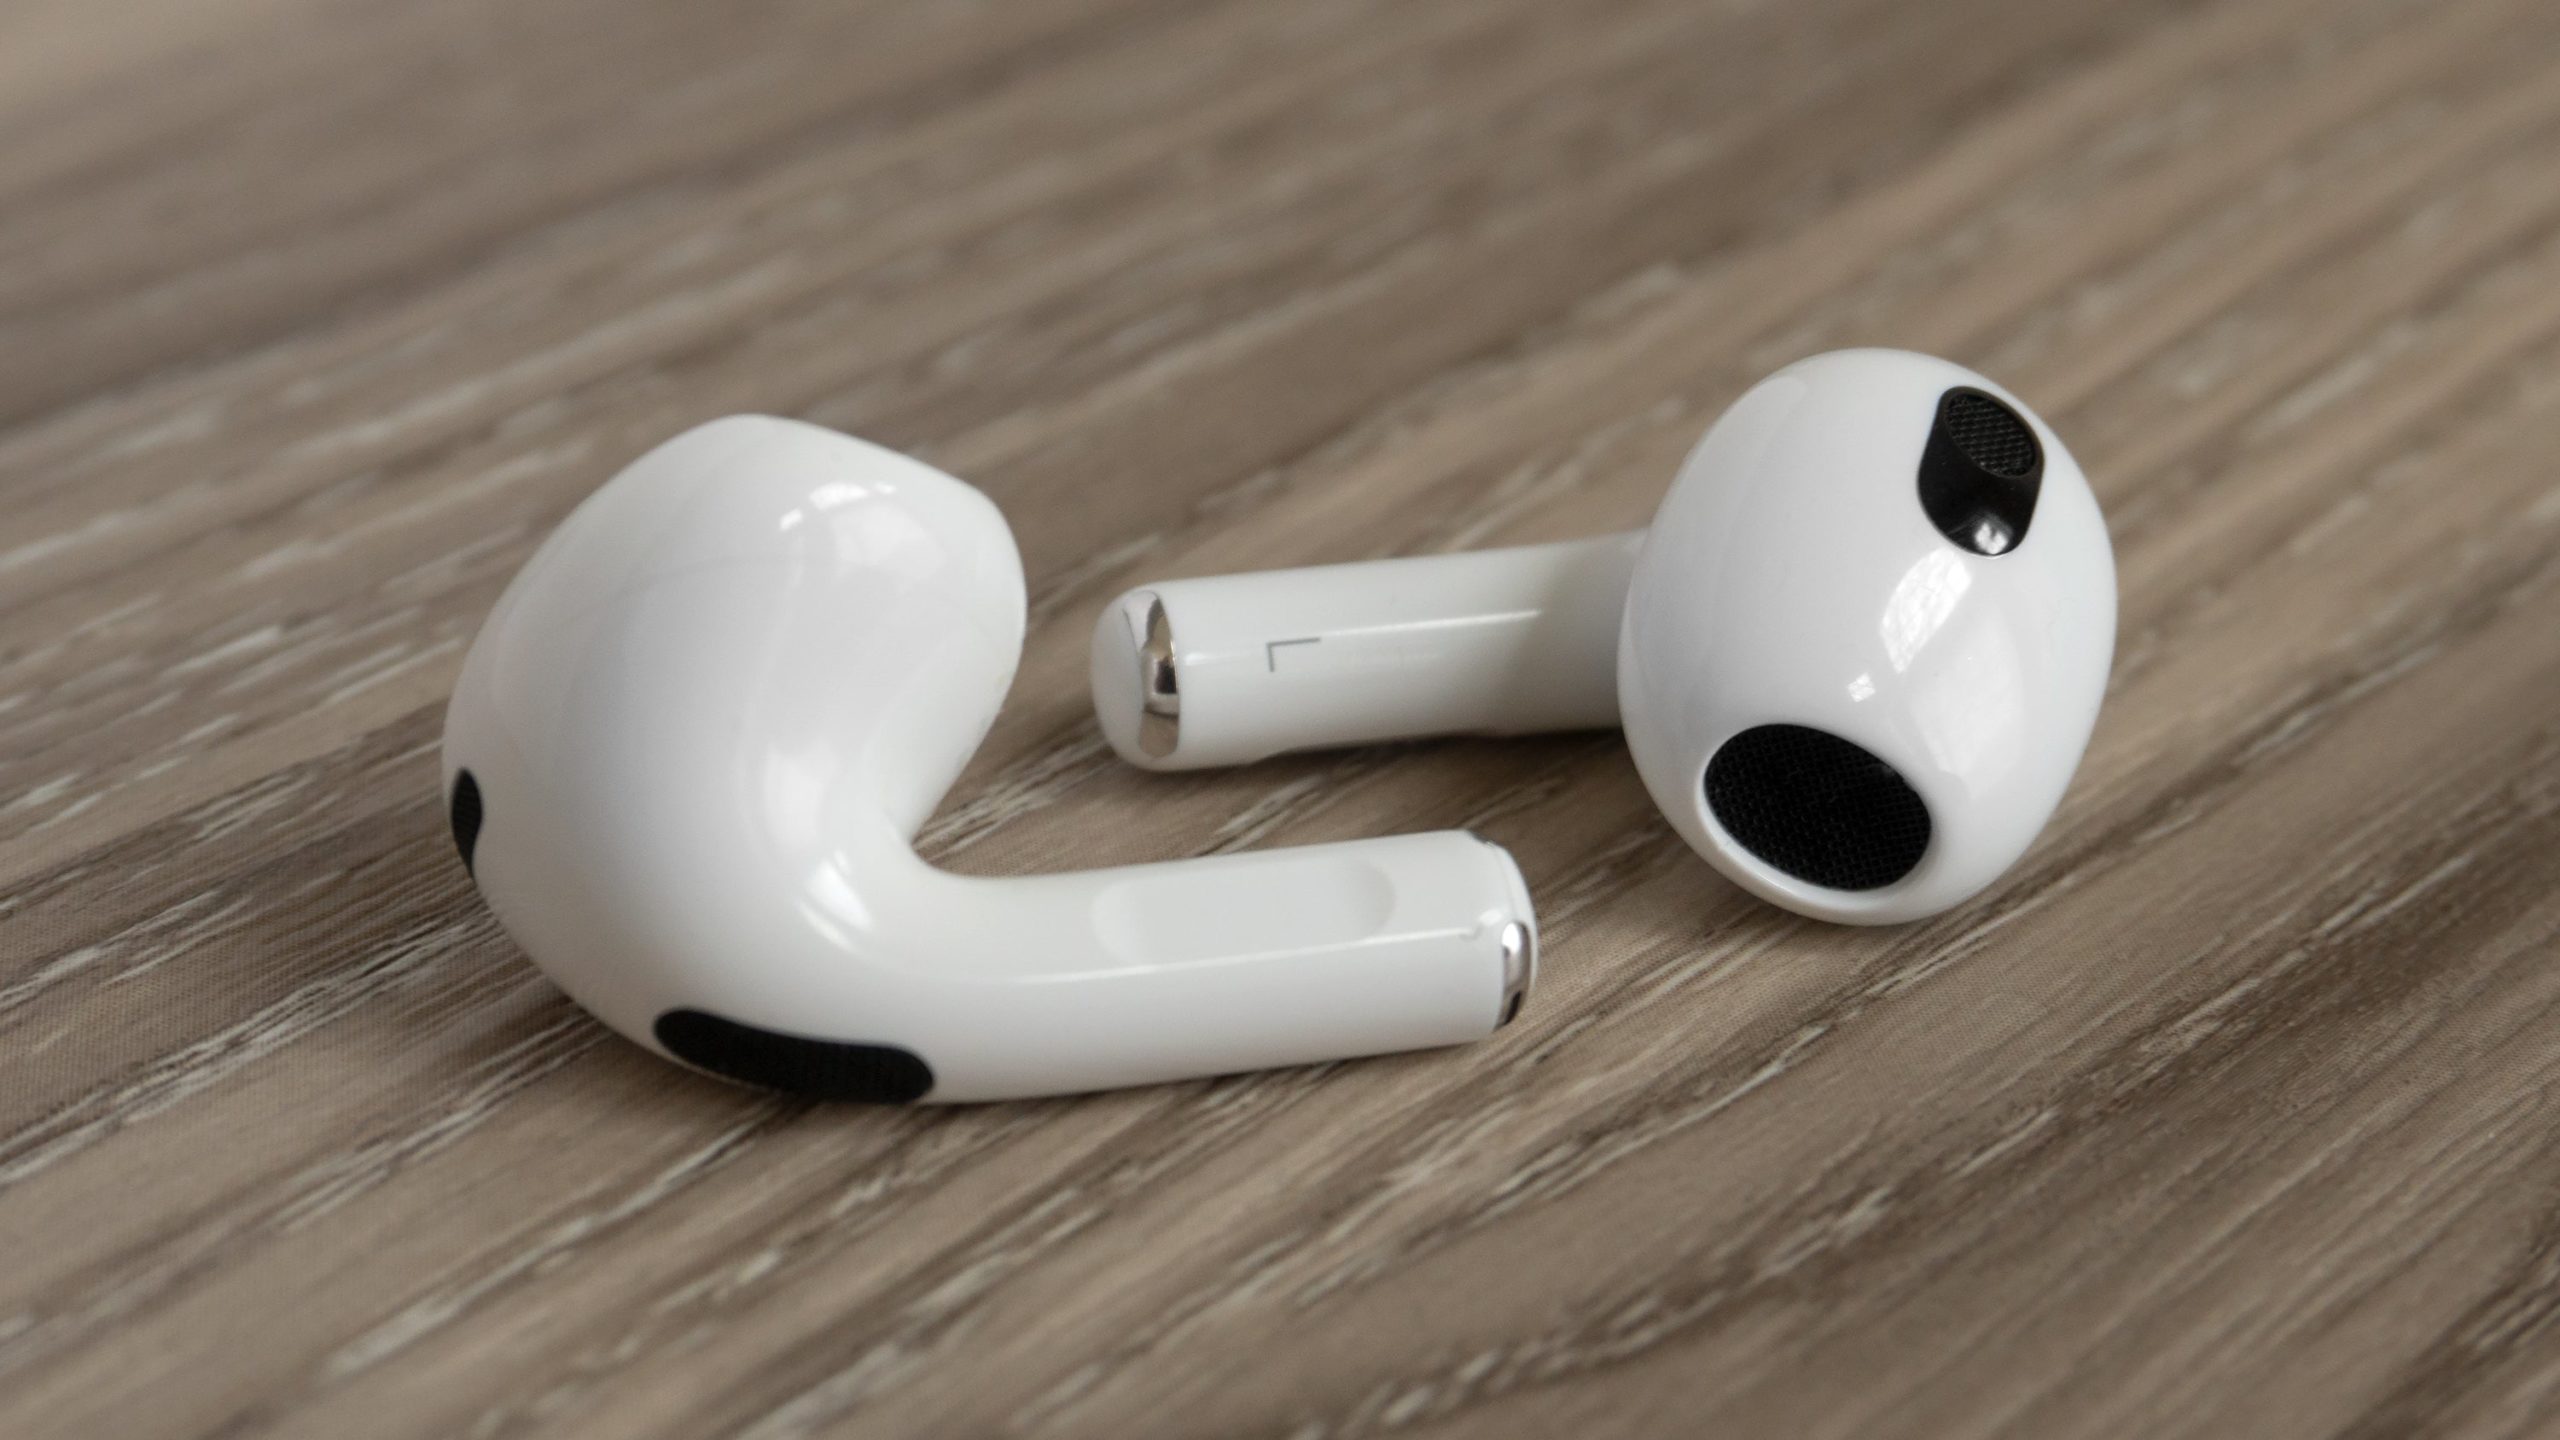 Apple has really improved the sound of the AirPods, but they're still far from being the best-sounding wireless earbuds you can buy. (Photo: Andrew Liszewski - Gizmodo)